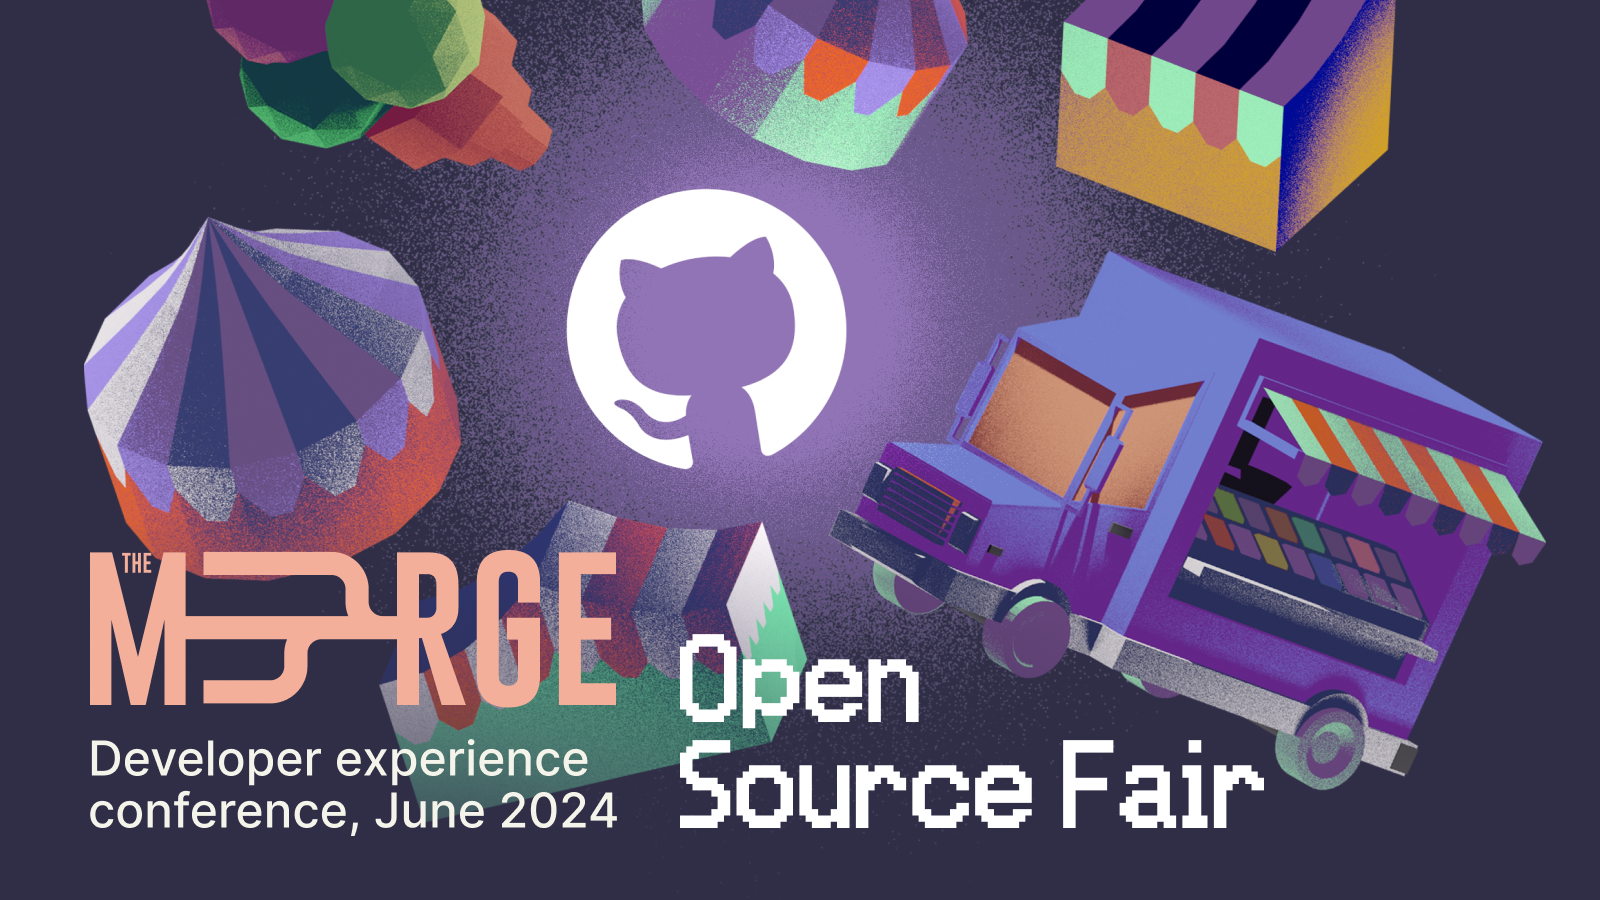 Open Source Fair @ The Merge Event